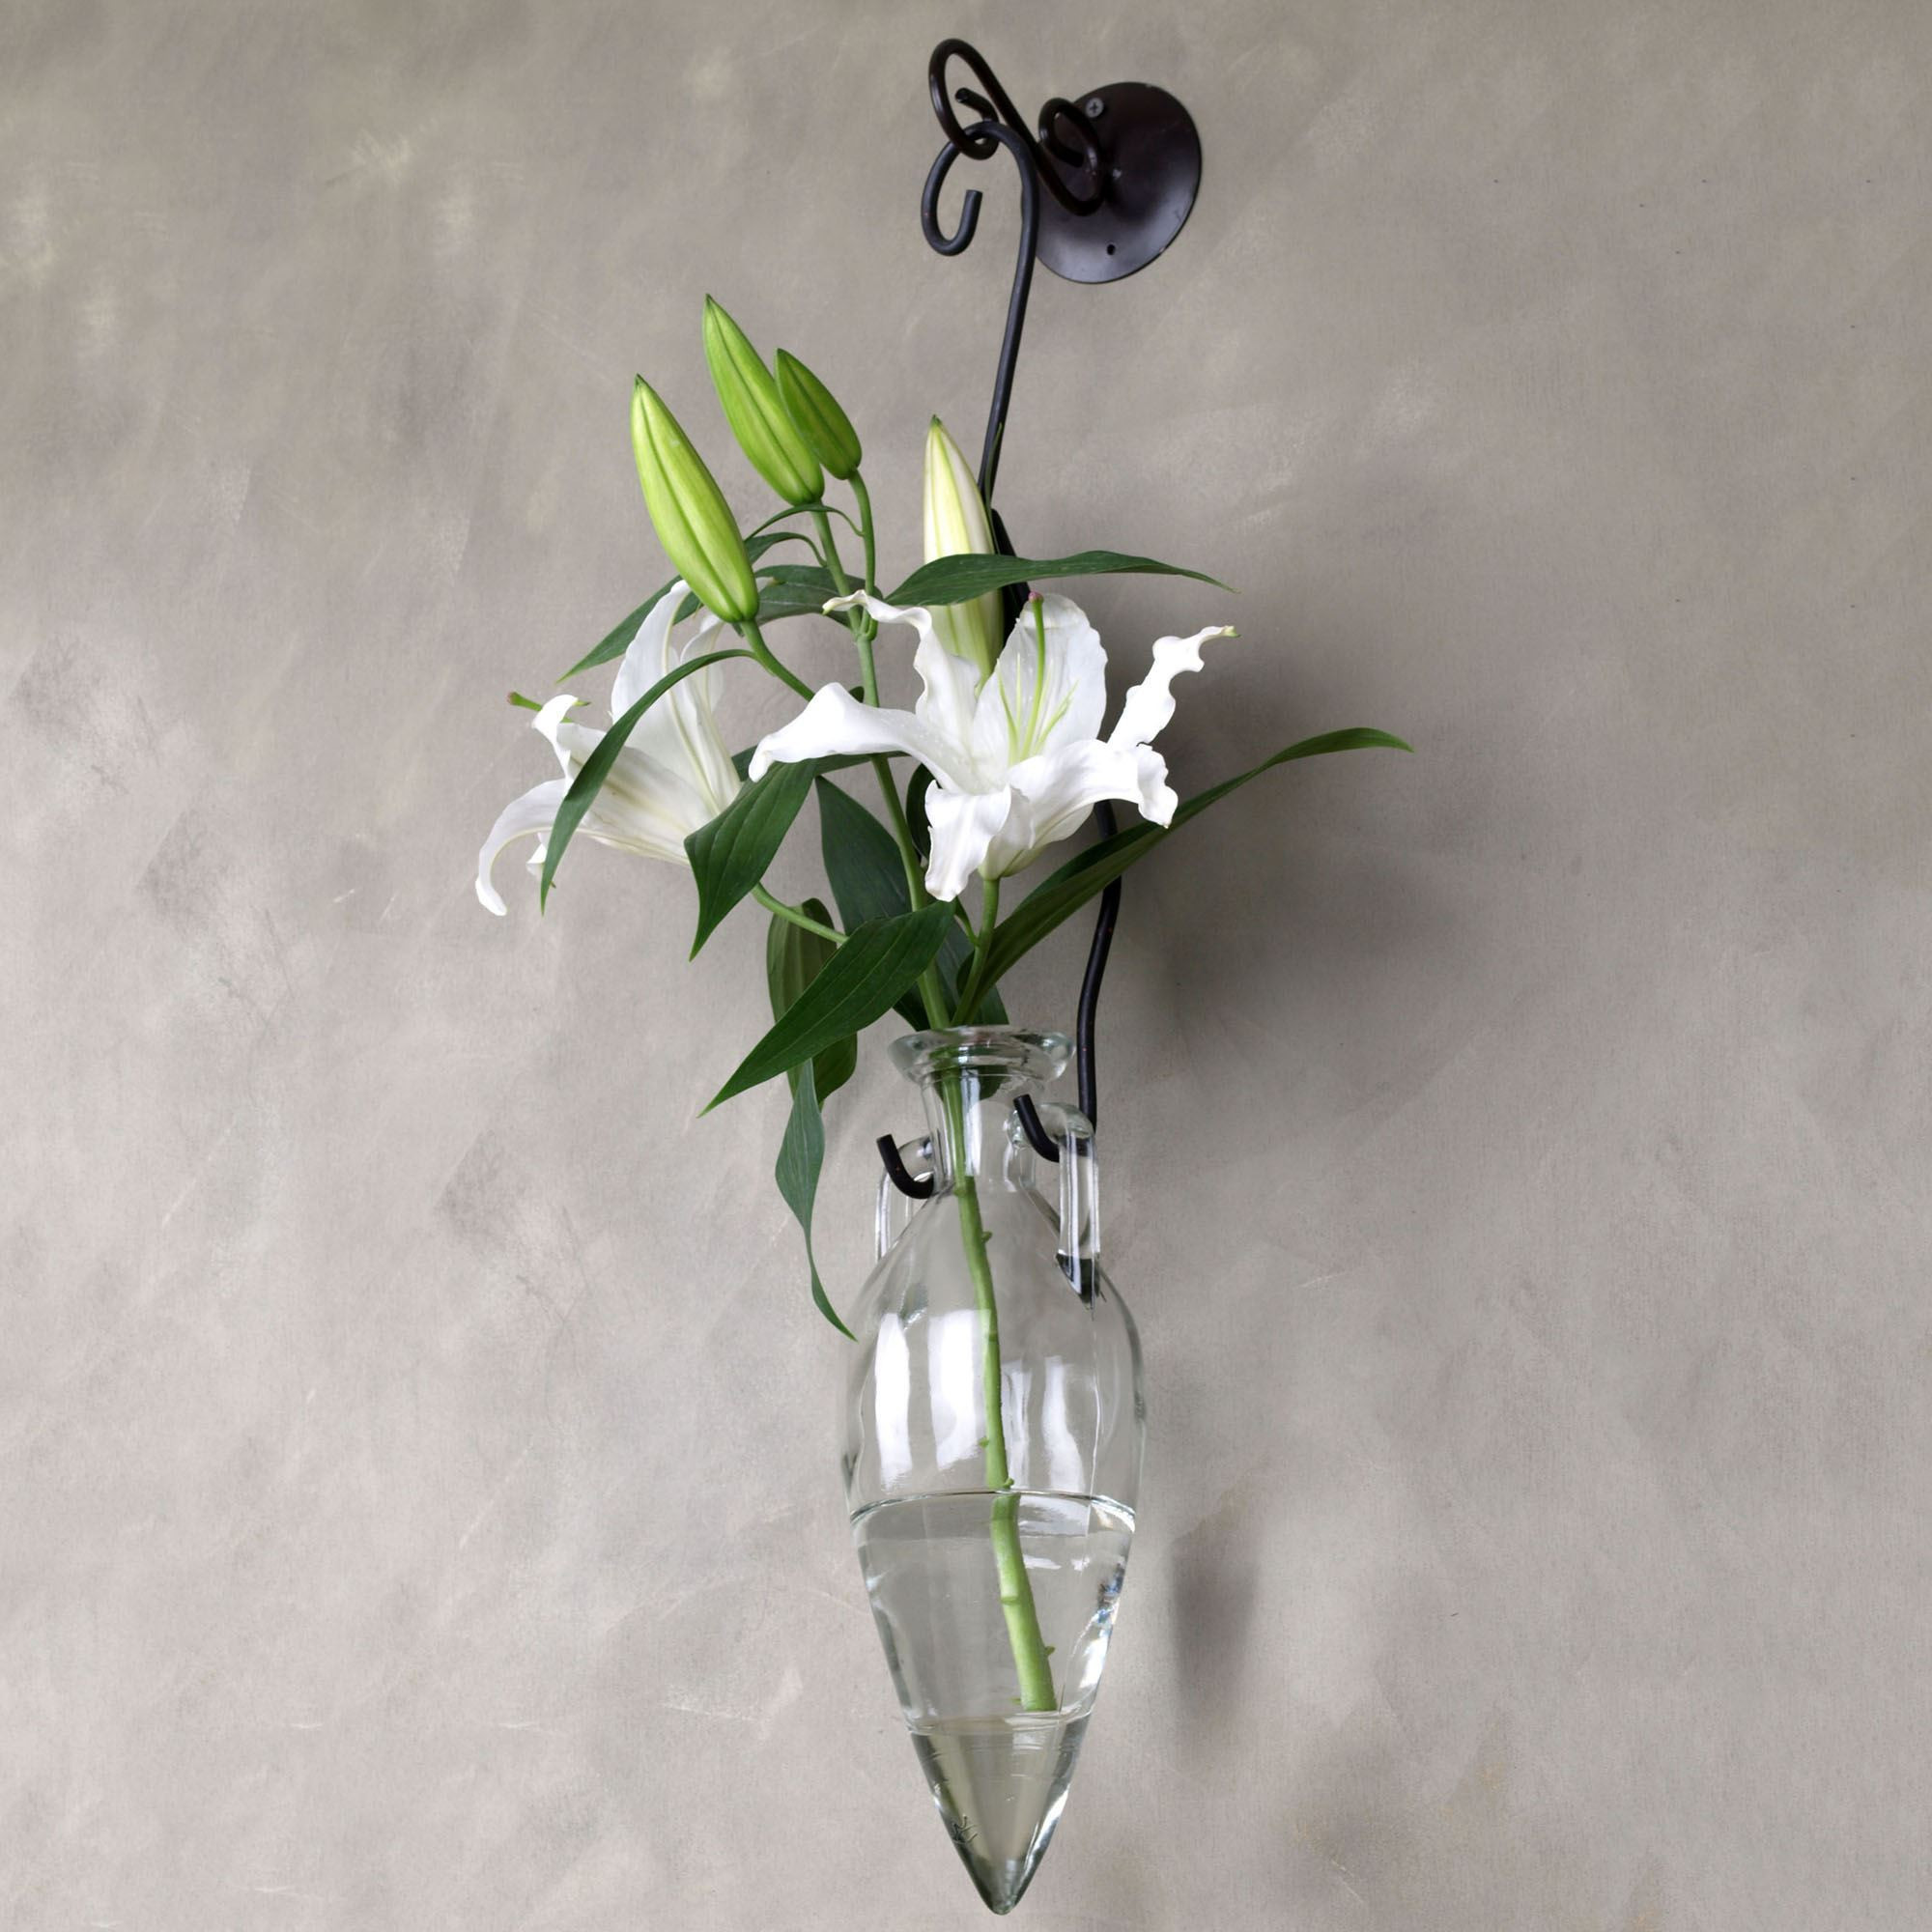 mexican blown glass vases of hanging glass vases wall gallery glass hanging vase hand blown glass within hanging glass vases wall gallery h vases wall hanging flower vase newspaper i 0d scheme wall